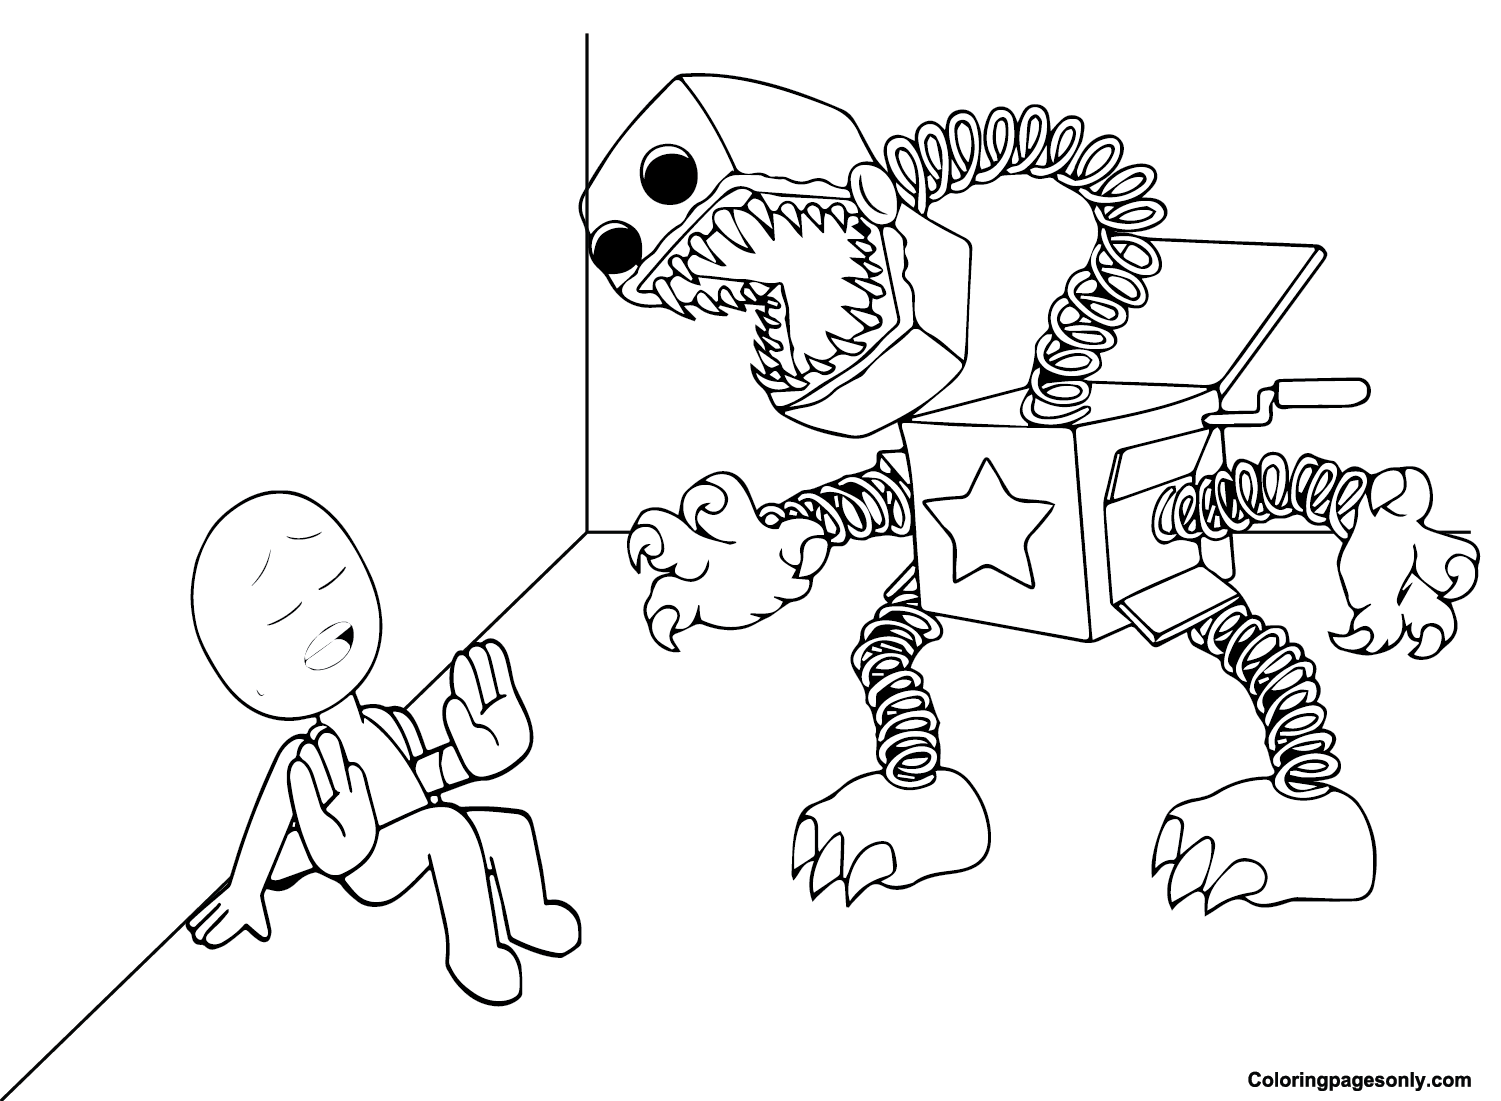 Boxy Boo Coloring Pages - Free Printable Coloring Pages